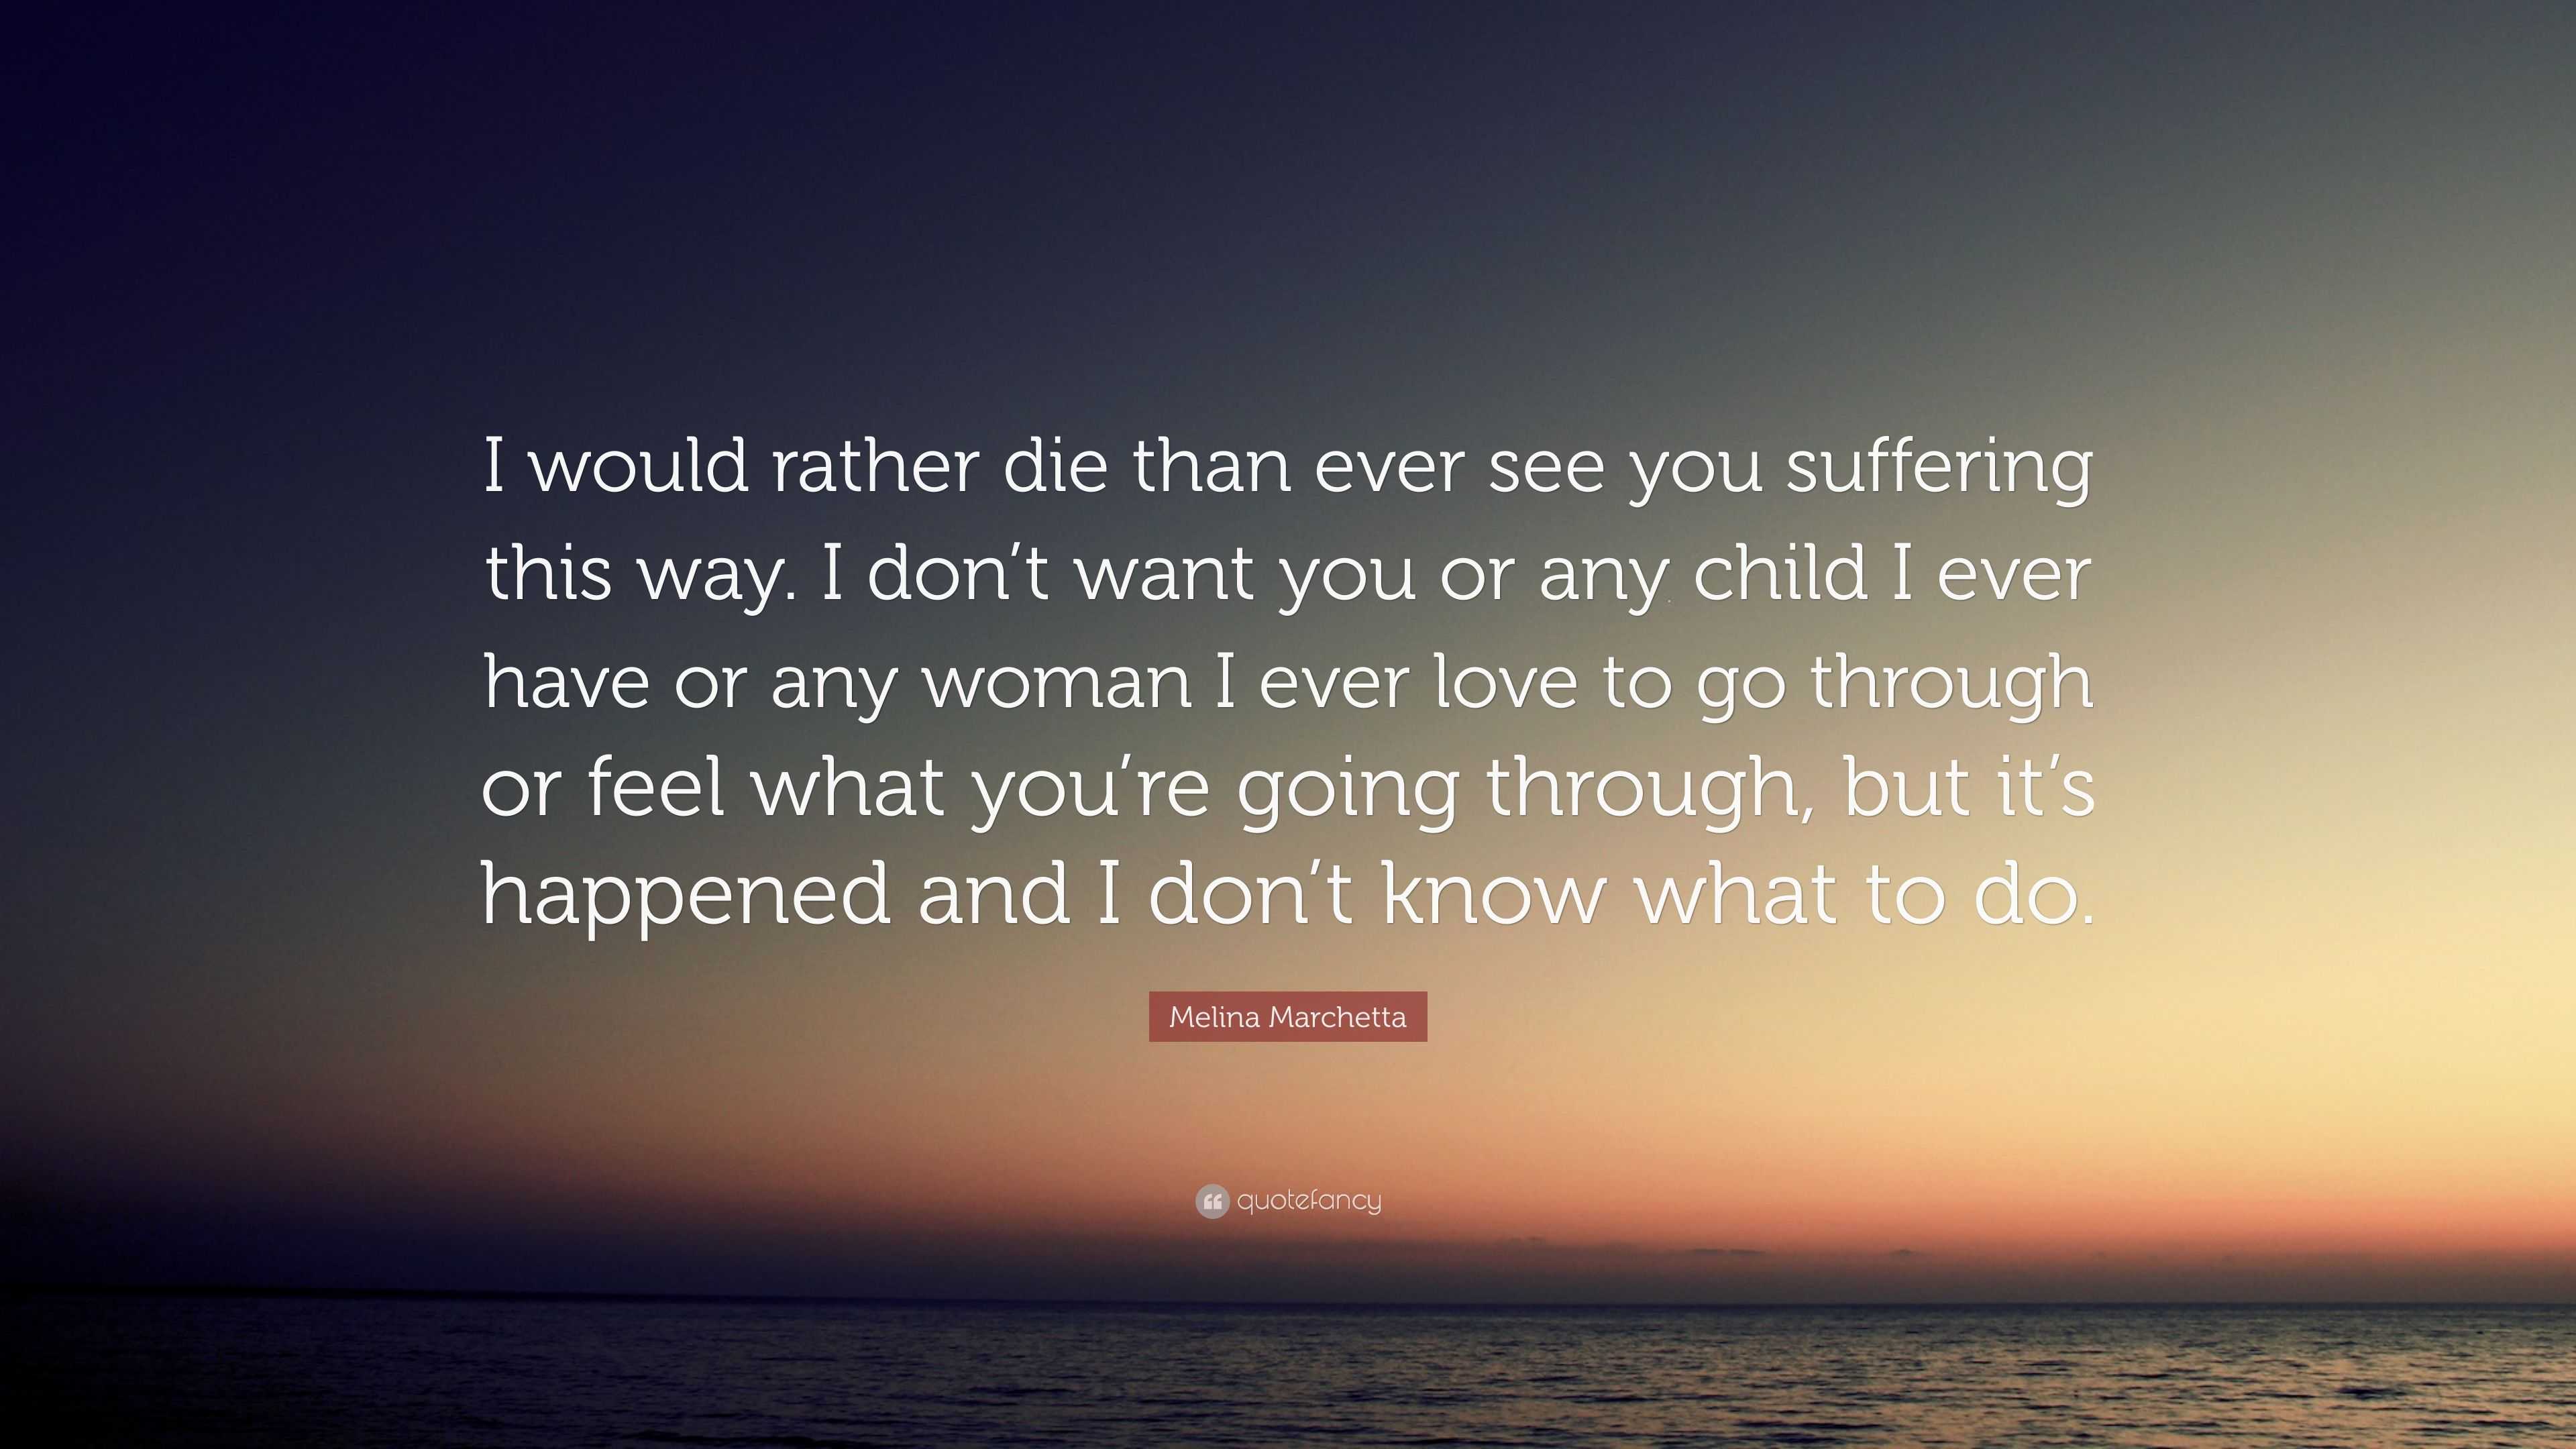 Melina Marchetta Quote: “I would rather die than ever see you suffering  this way. I don't want you or any child I ever have or any woman I ever  l...”